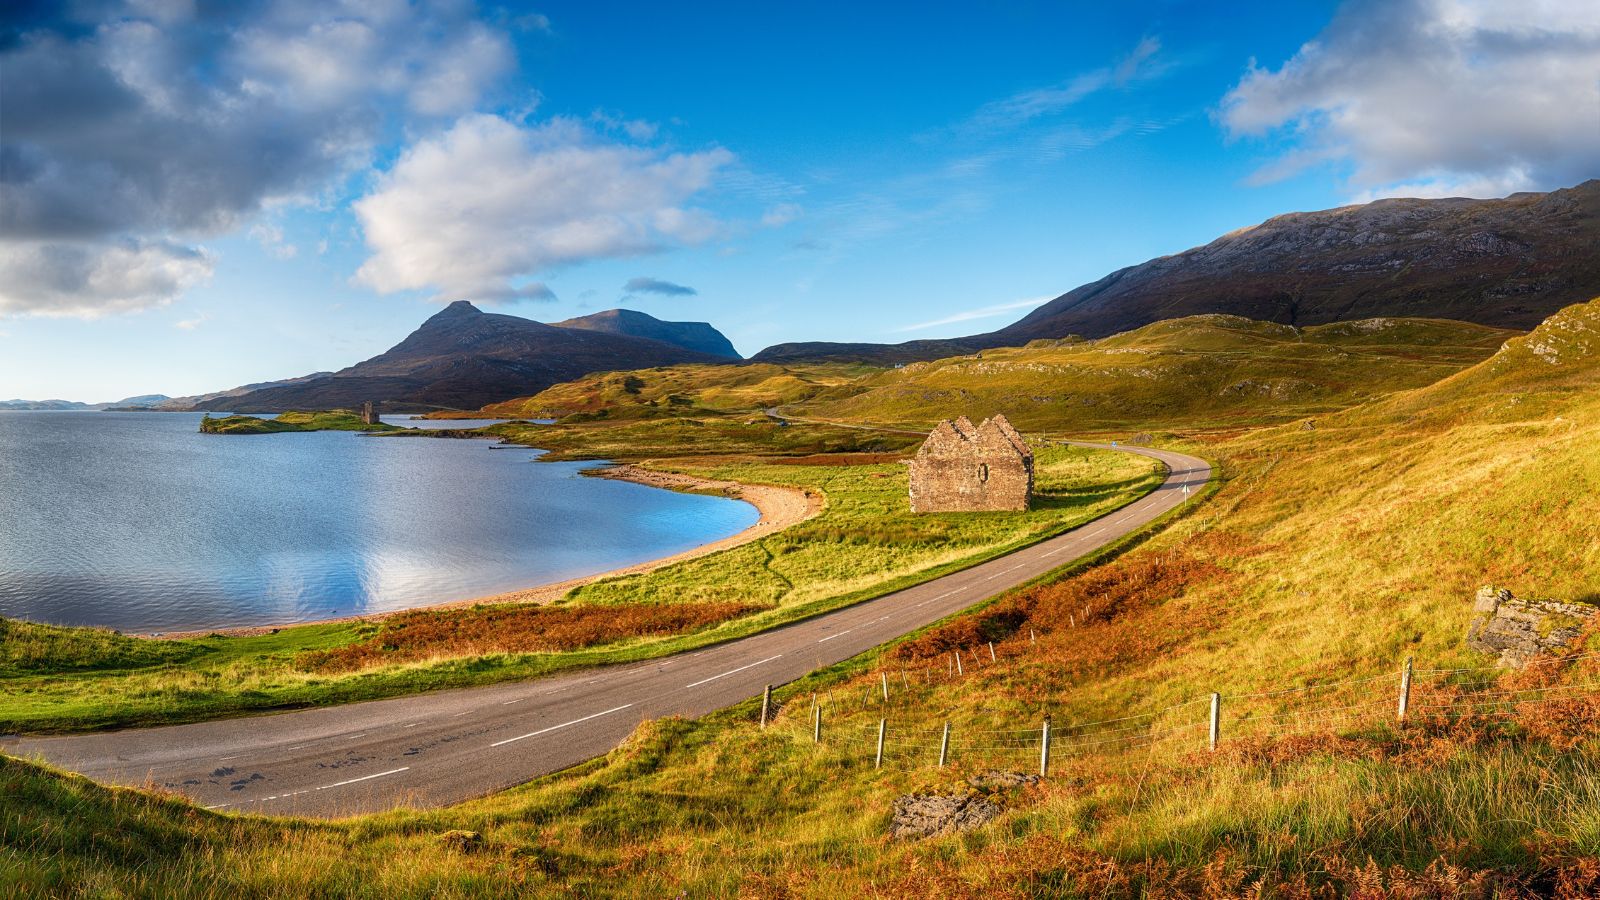 <p>As you can tell, there are masses of incredible things to do in Scotland! I hope this list has given you some new ideas for how to spend your time there.</p><p>Whether you’re exploring its cities, hiking in the Highlands, spending time on the Scottish islands, or sampling whisky at a distillery, you’re sure to leave this beautiful country with some fantastic memories.</p><p><strong>MORE ARTICLES LIKE THIS COMING UP:</strong></p>